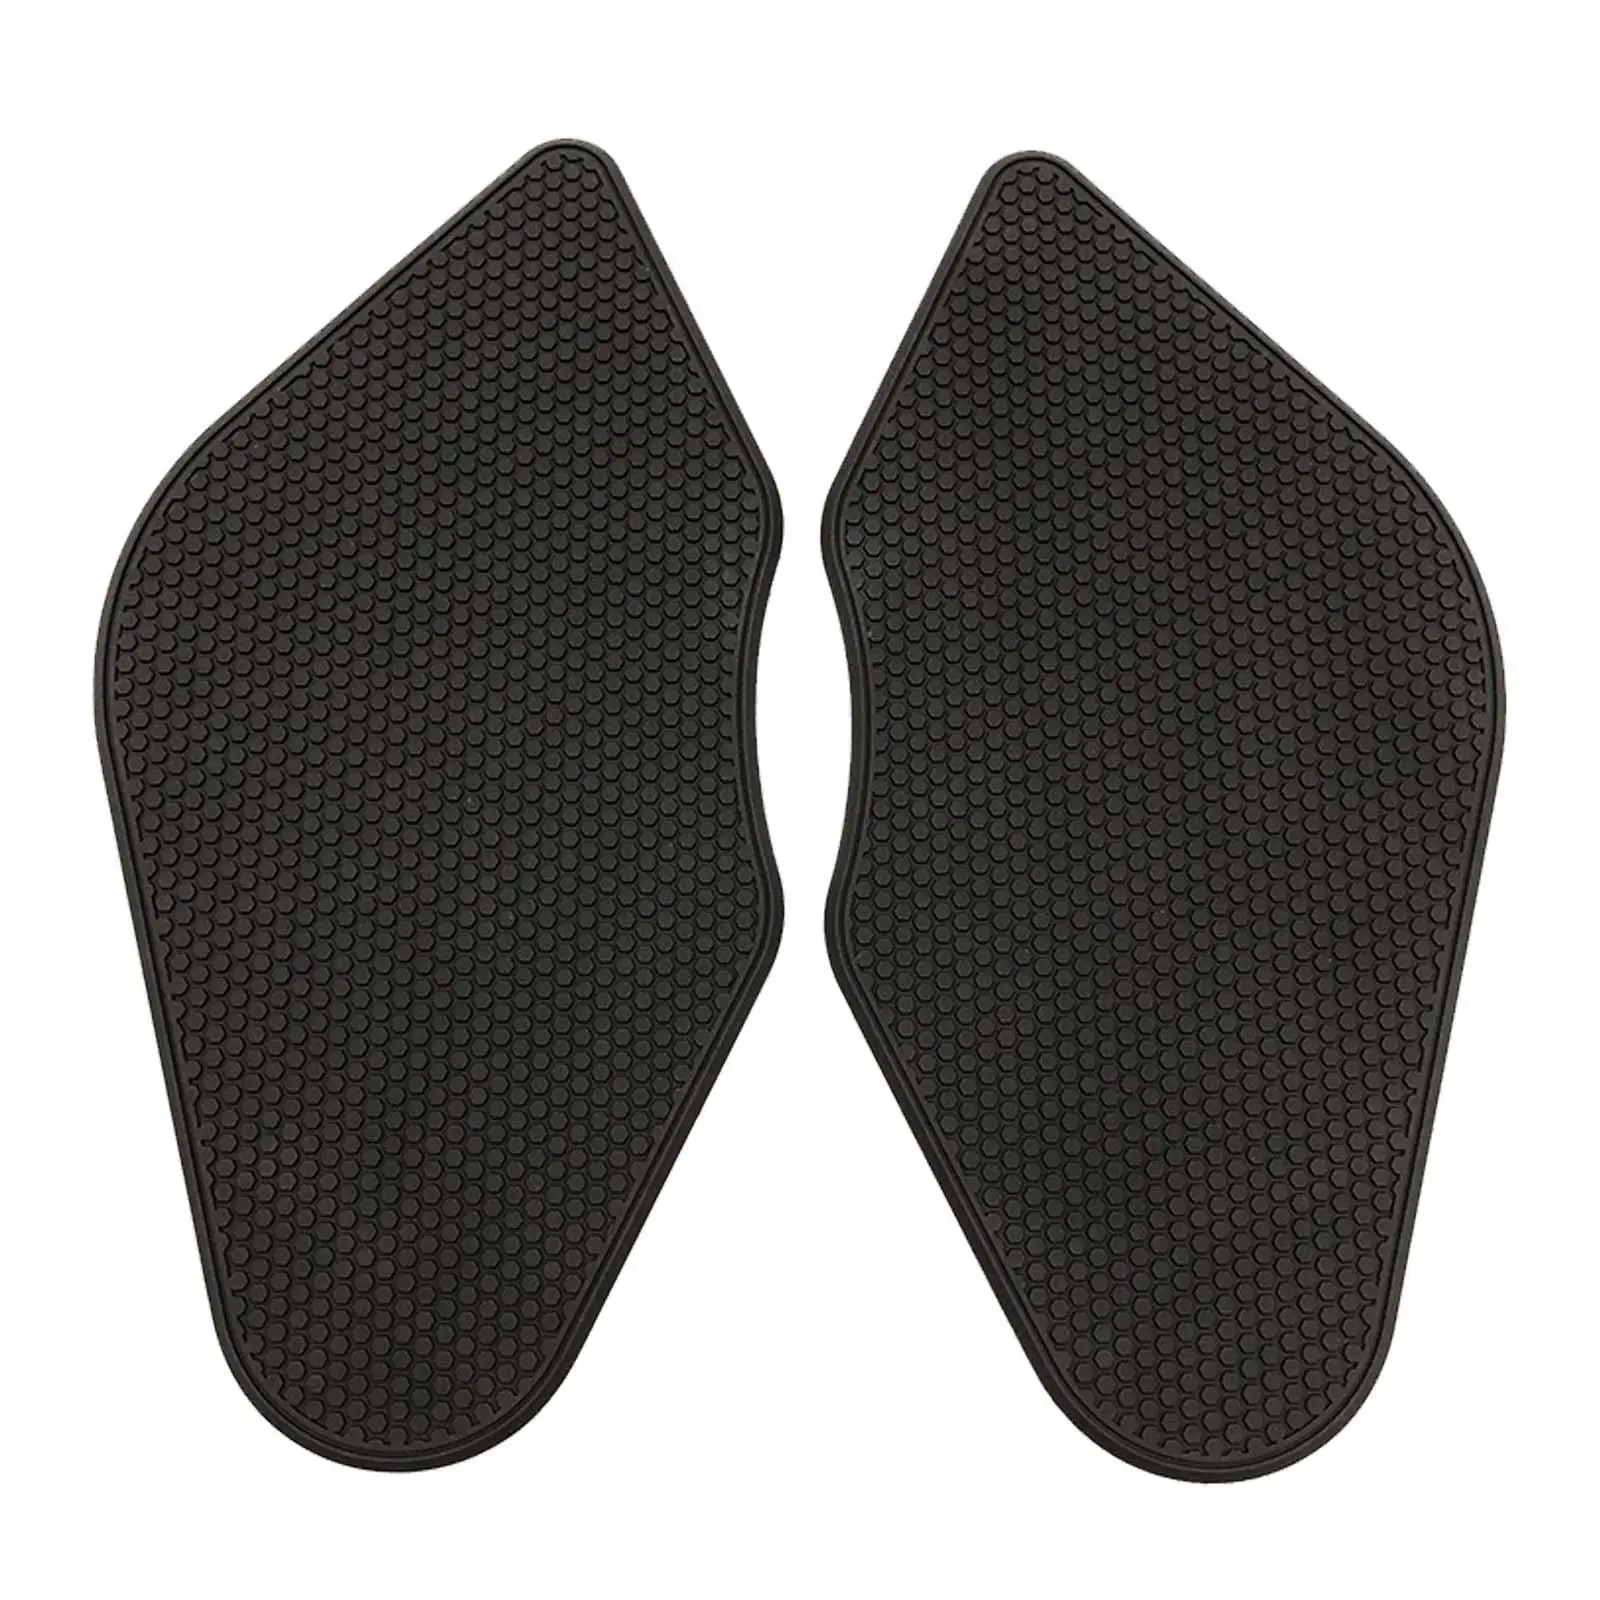 

2Pcs Motorcycle Side Tank Pad Rubber for Suzuk V-strom 650 ABS XT 17-23